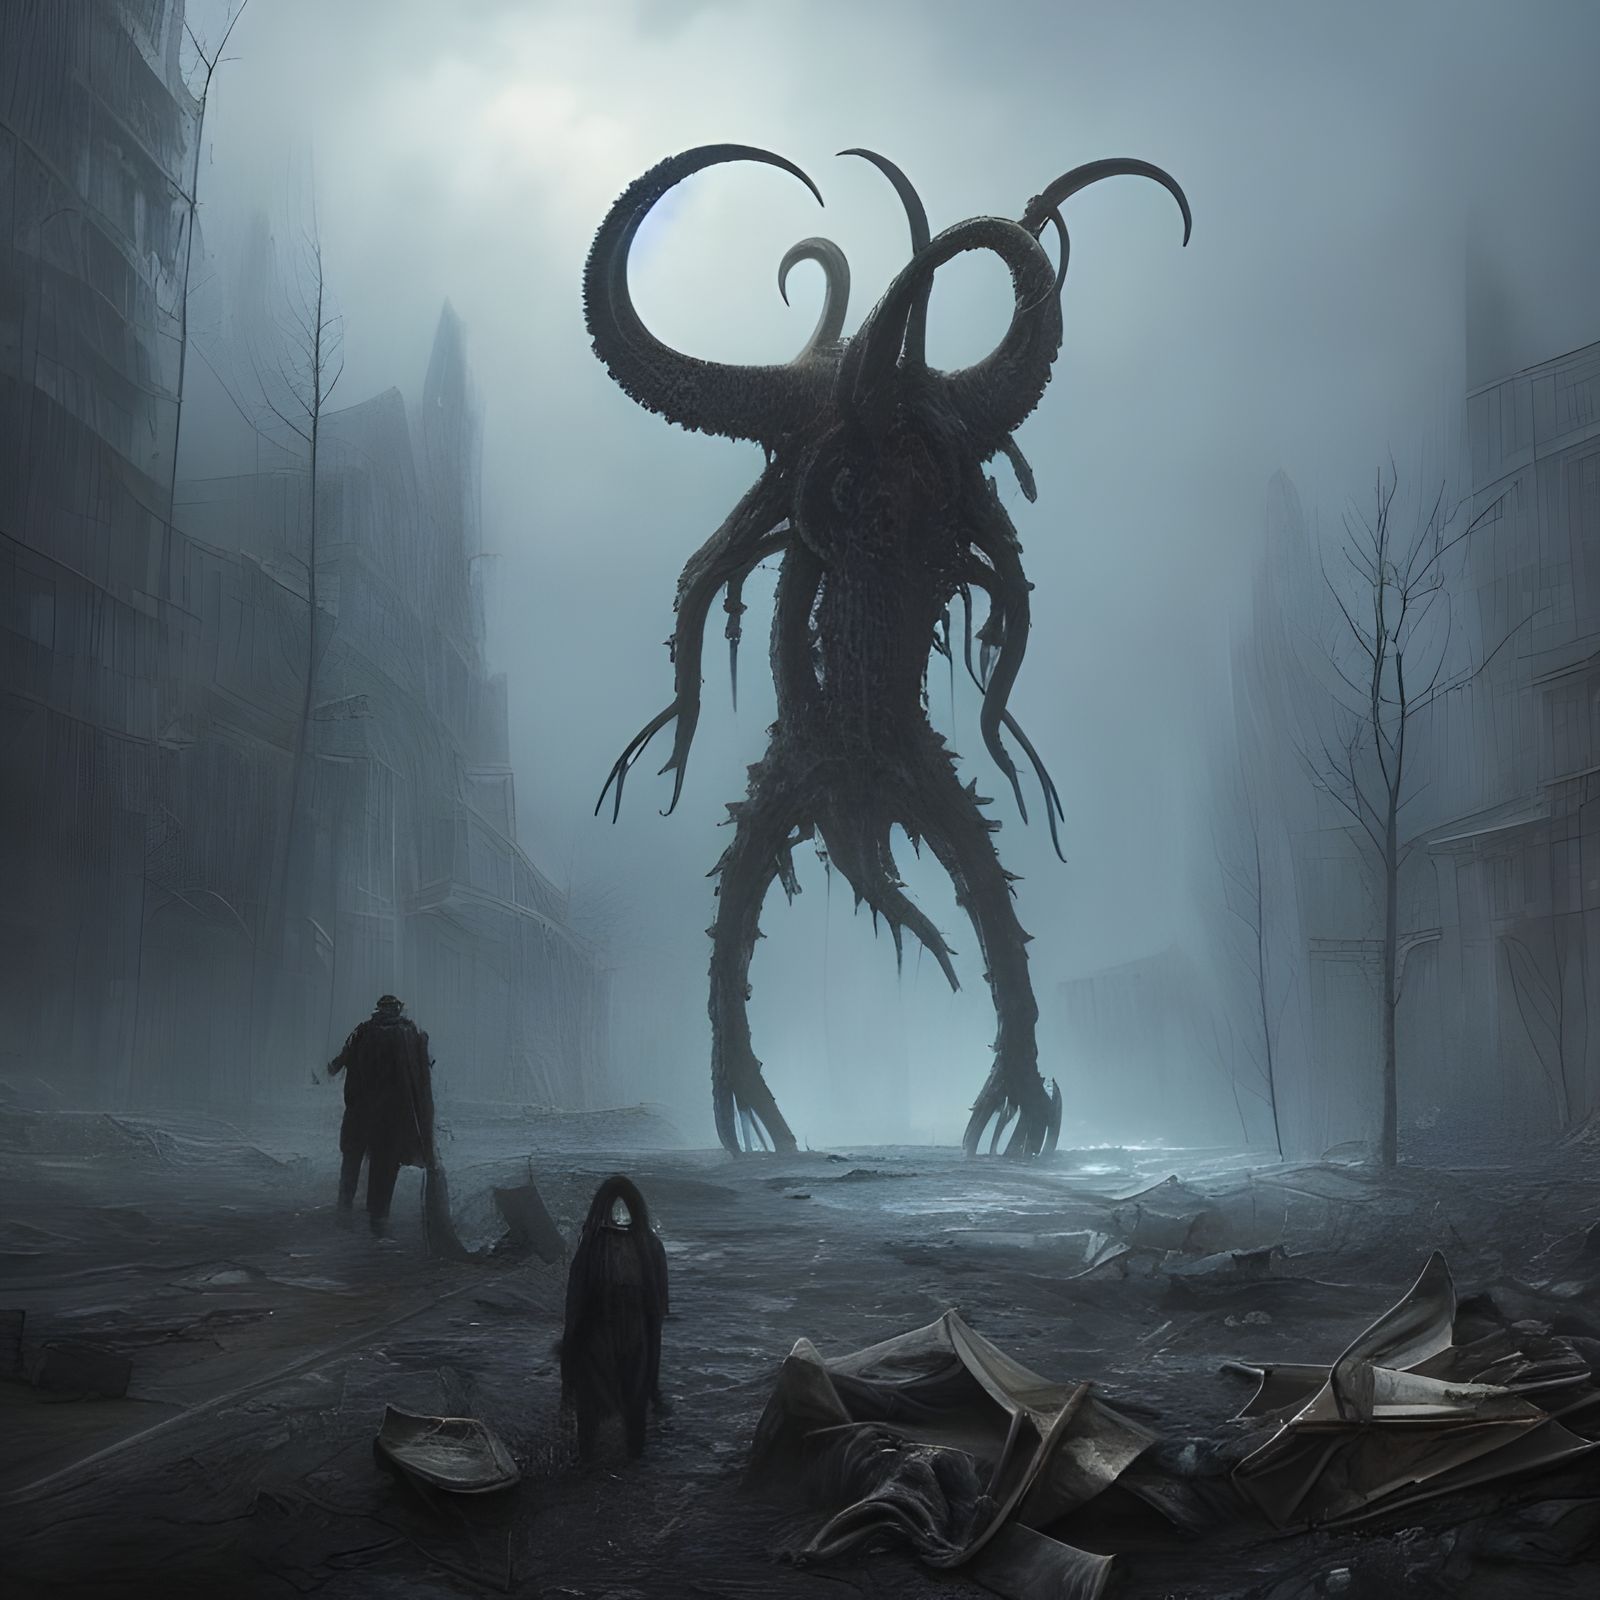 Sinister Post-Apocalyptic World Ruined by a H P Lovcraft Elder God